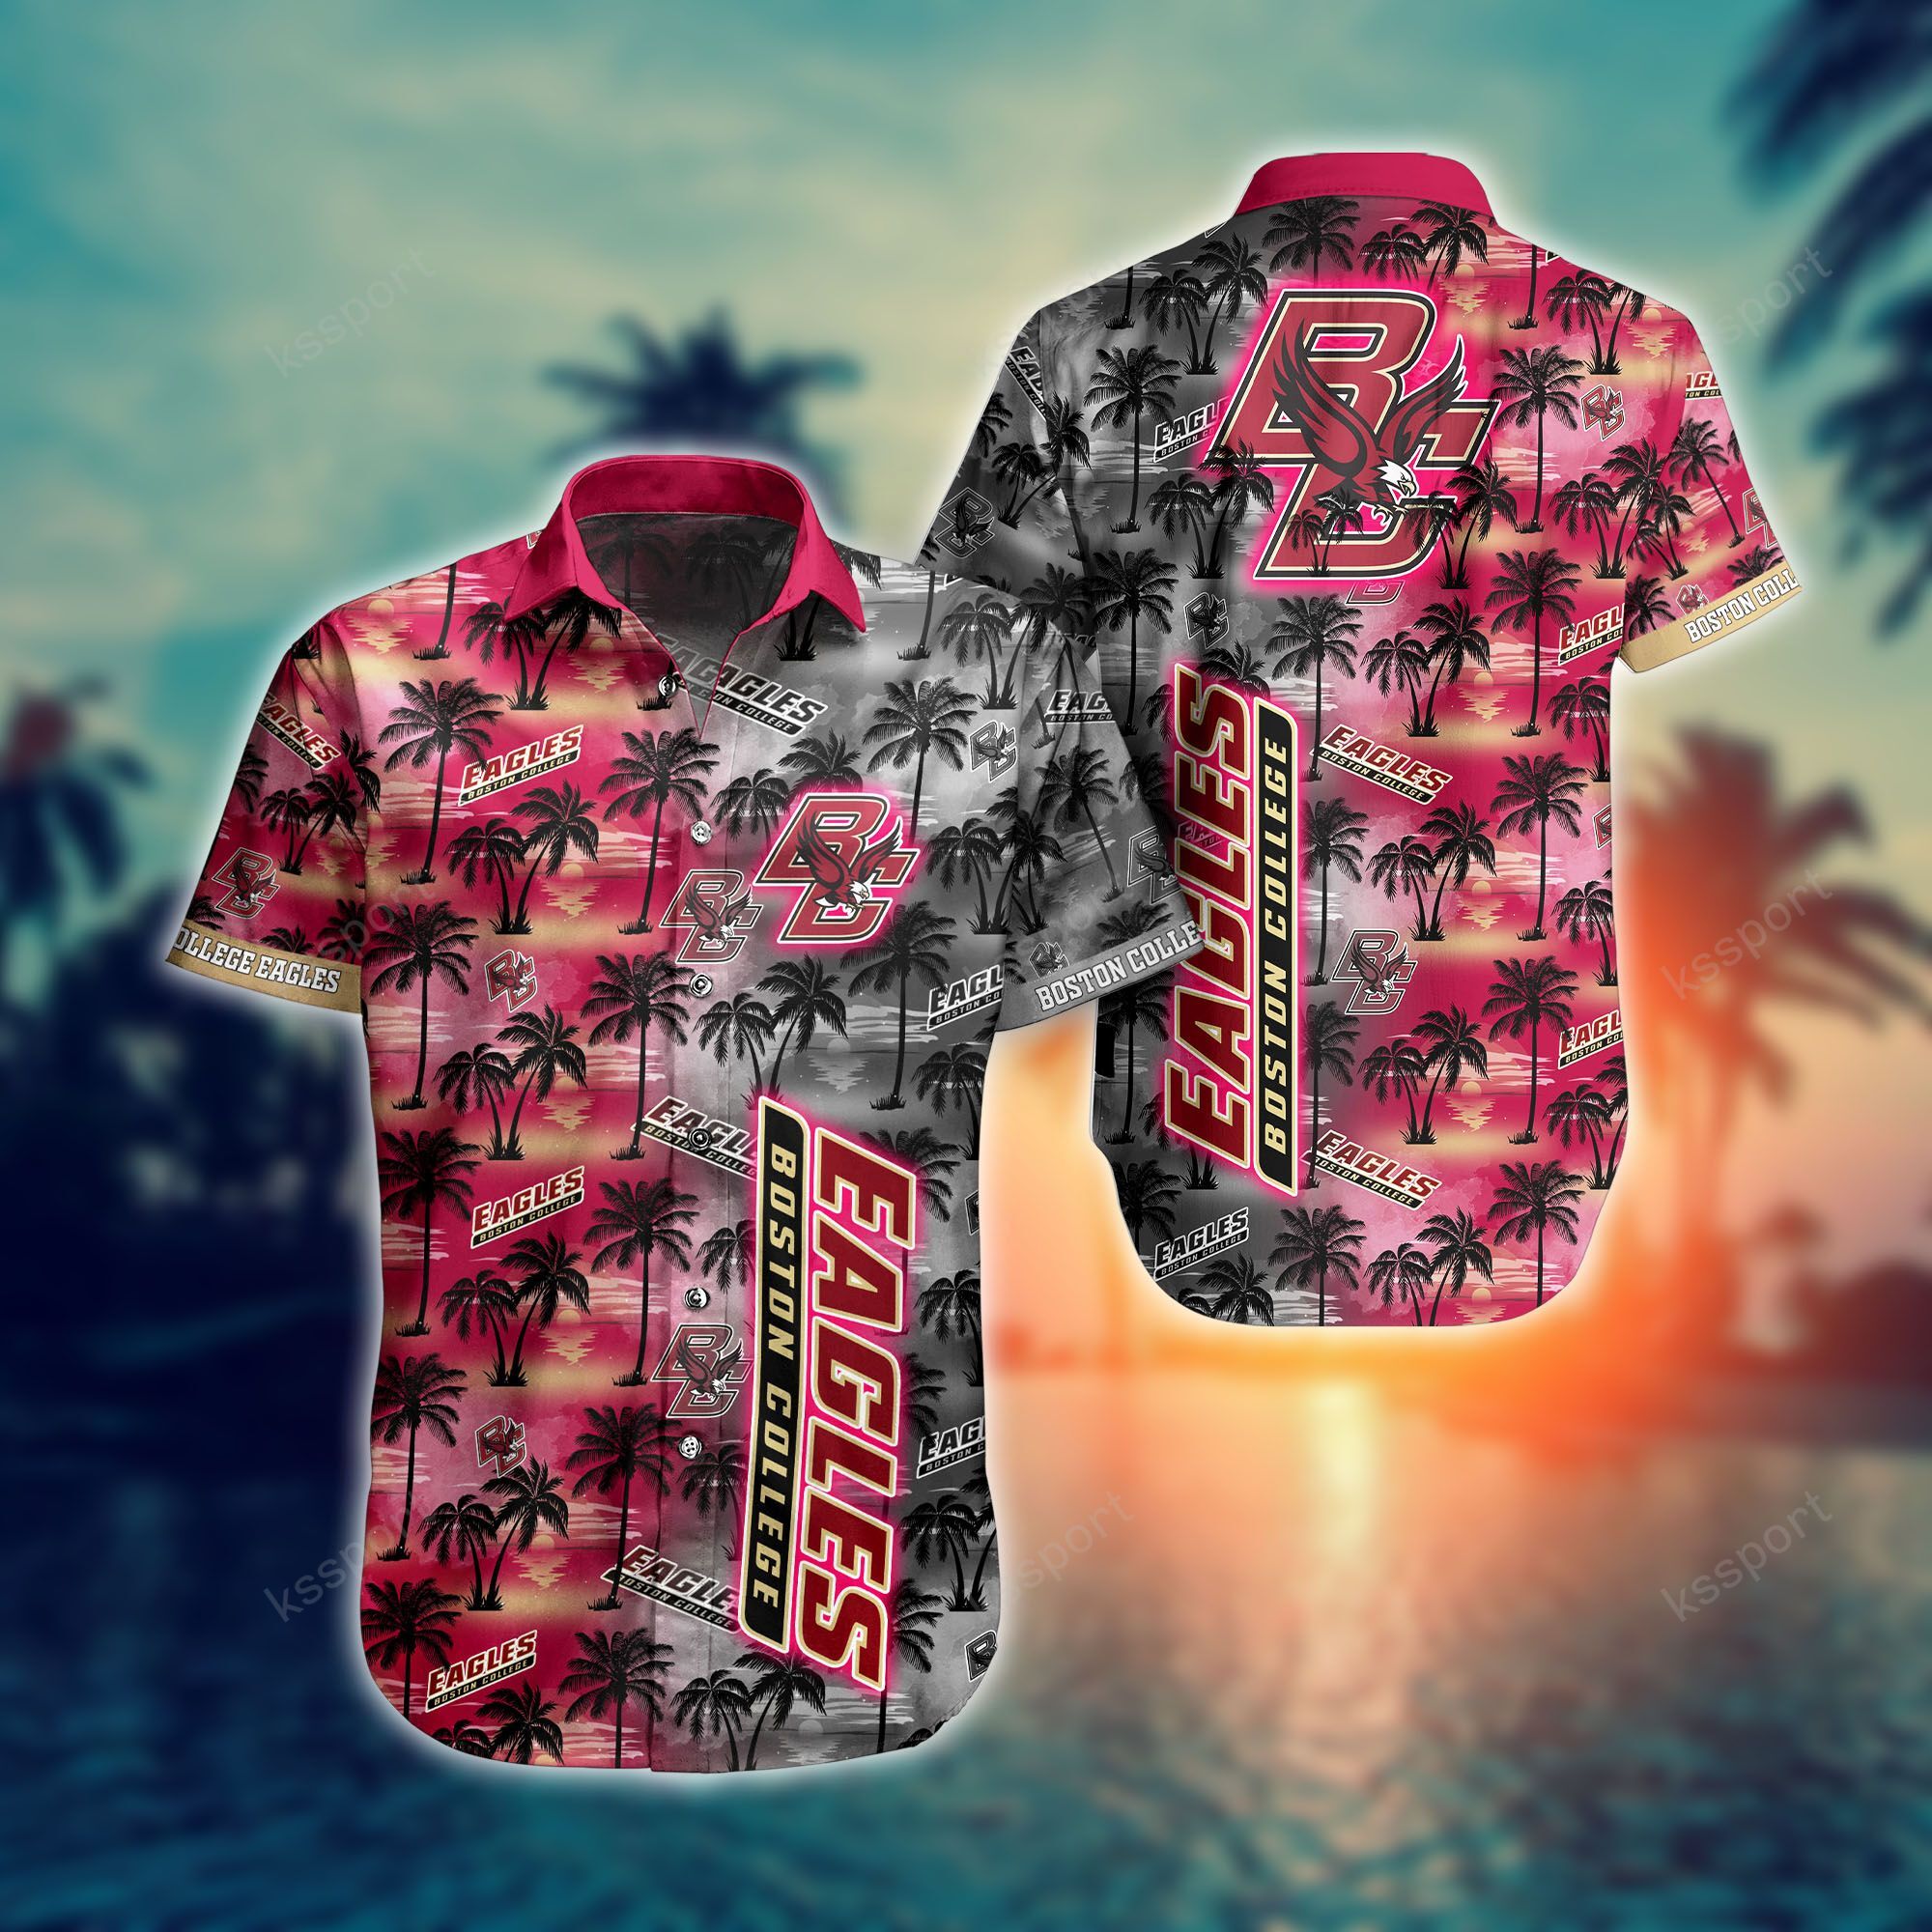 Treat yourself to a cool Hawaiian set today! 12